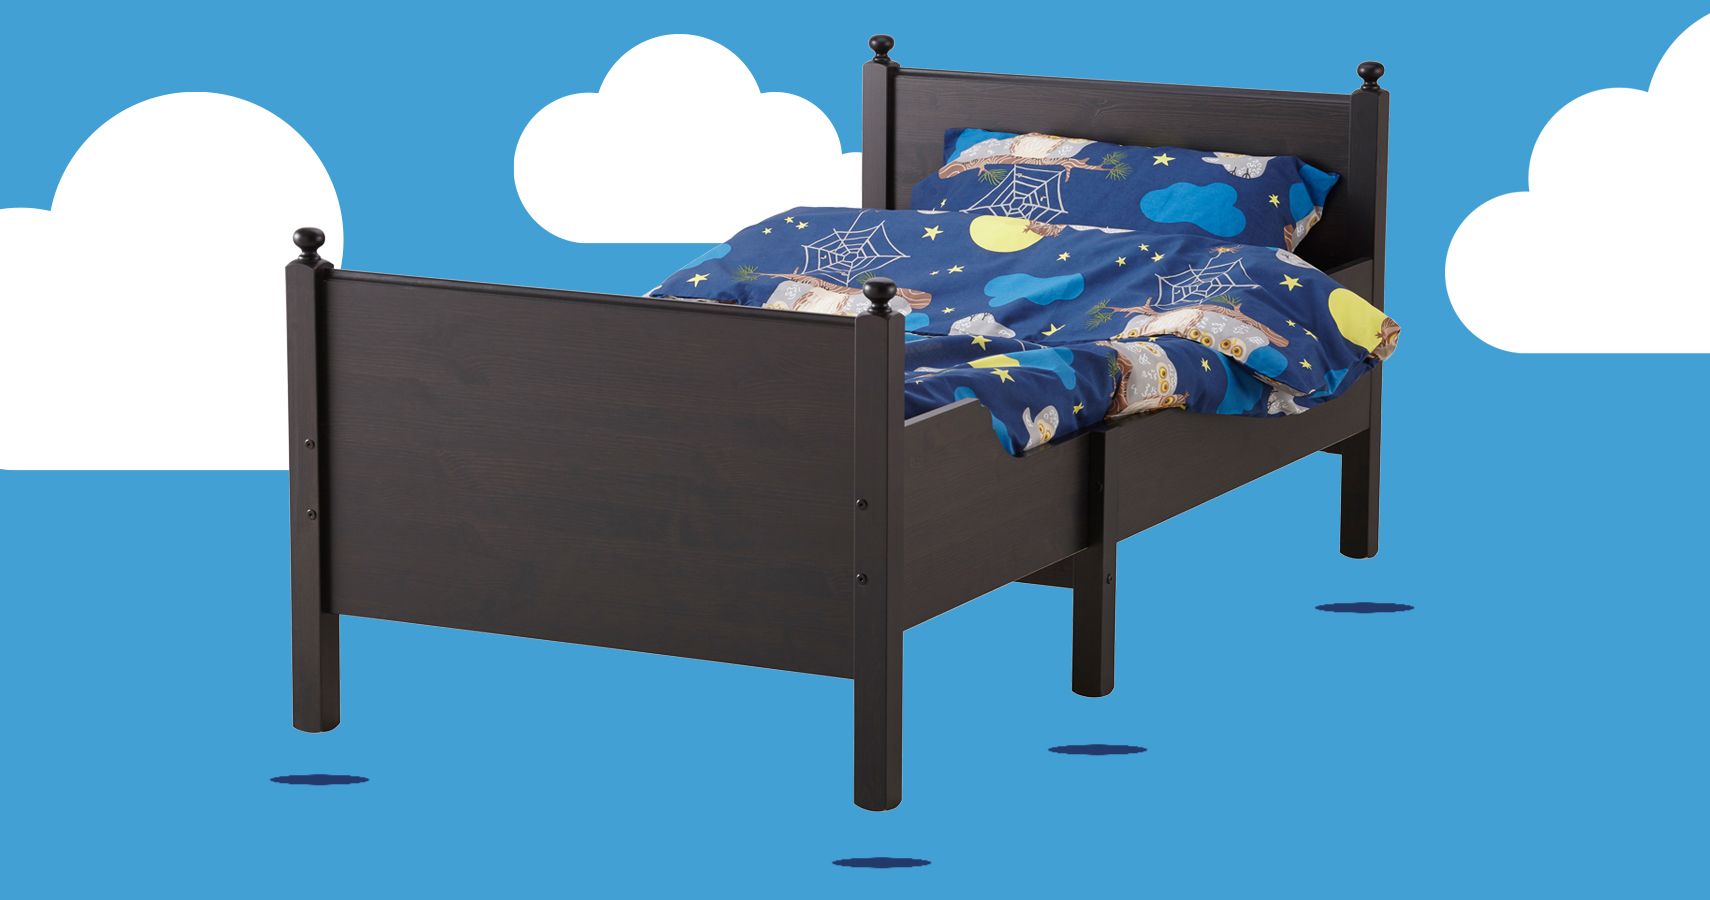 6 Things To Look For When Buying A Big Kid Bed